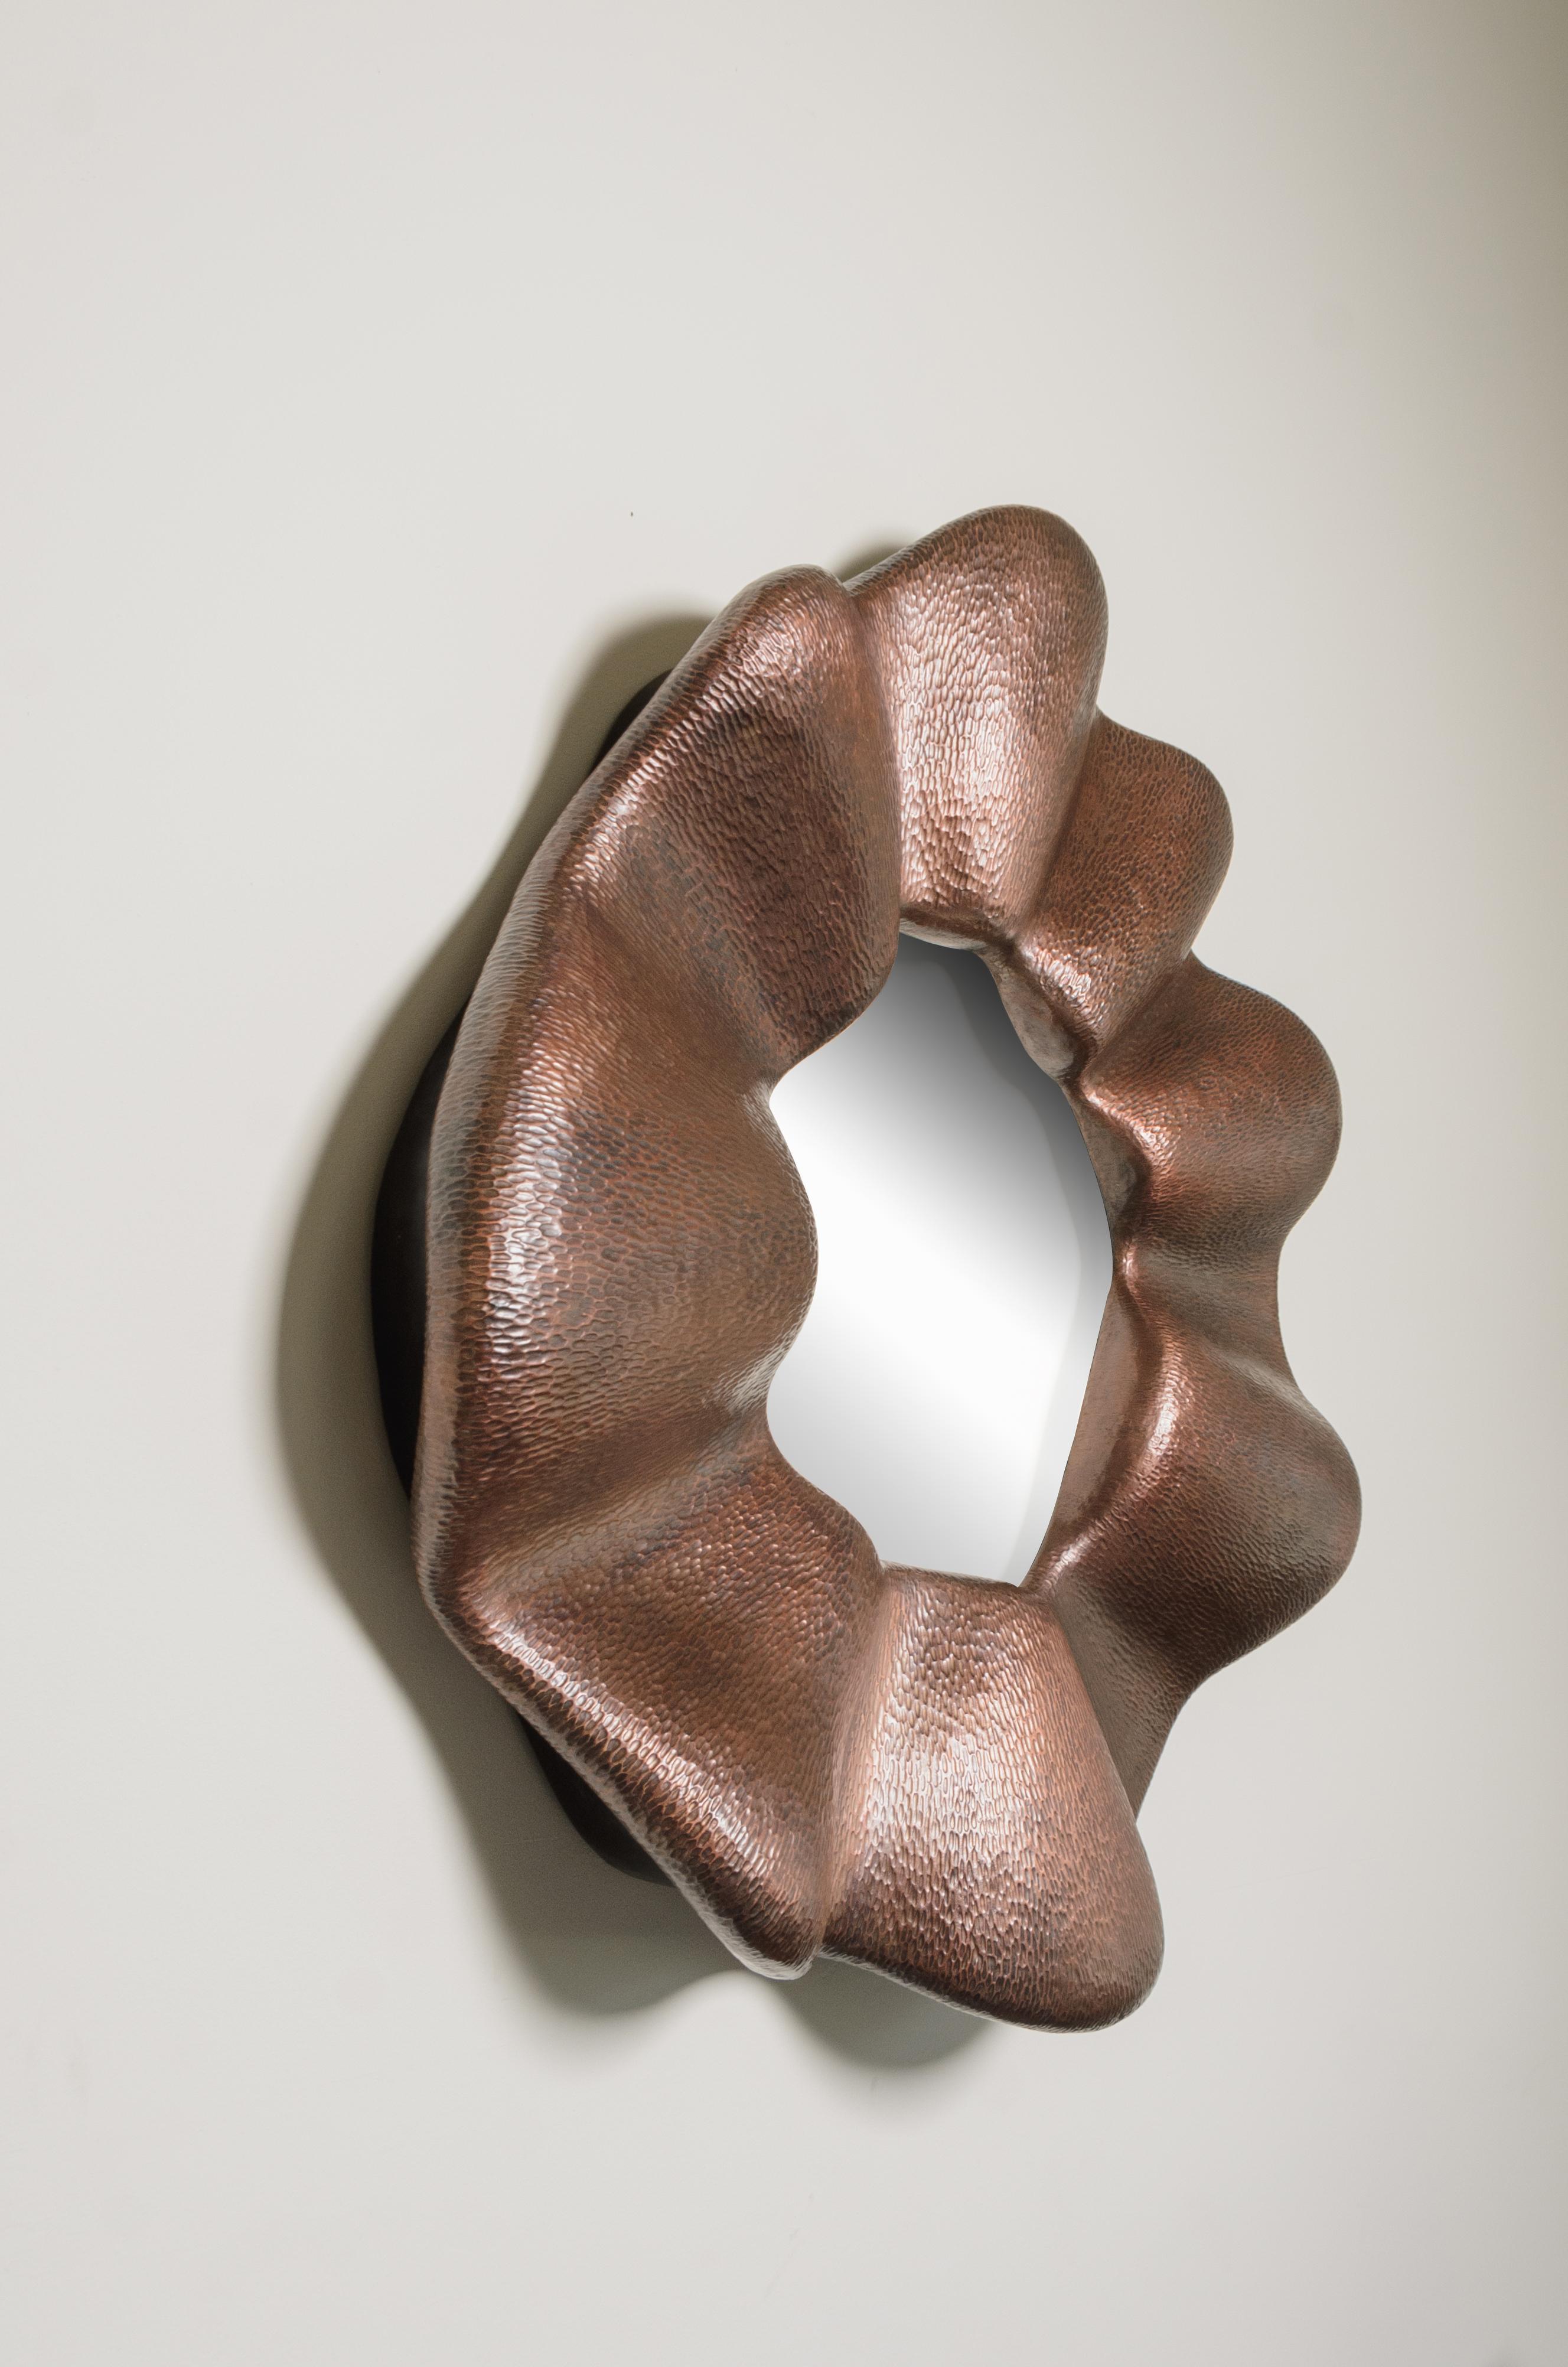 Contemporary Ji Guan Mirror in Hand Repoussé Copper by Robert Kuo For Sale 1